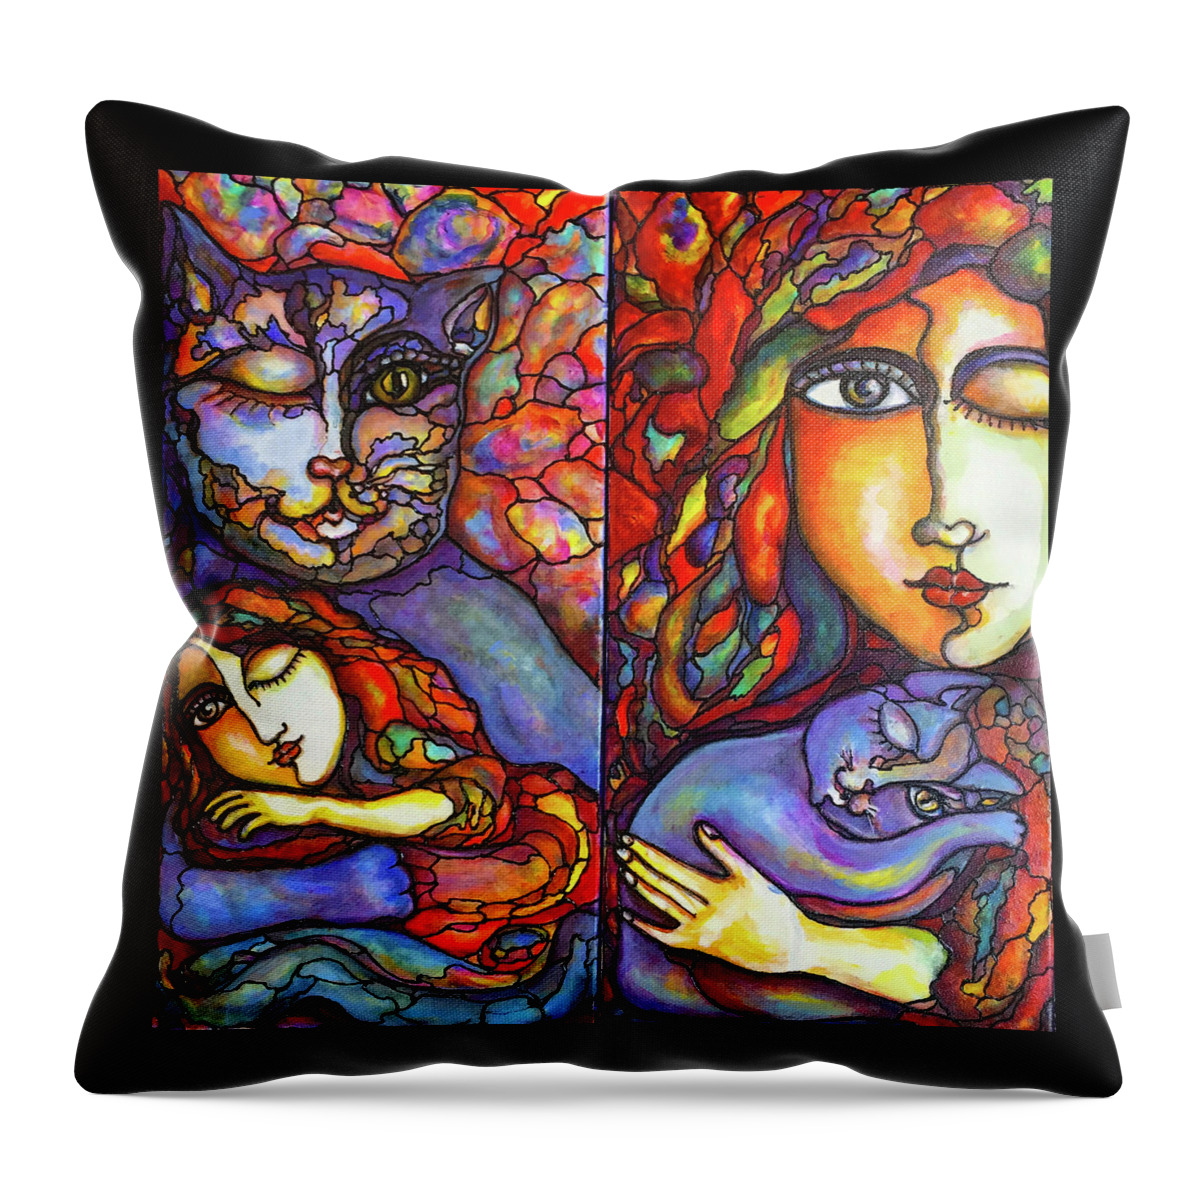 Diptych Throw Pillow featuring the painting Lucid Dreams by Rae Chichilnitsky